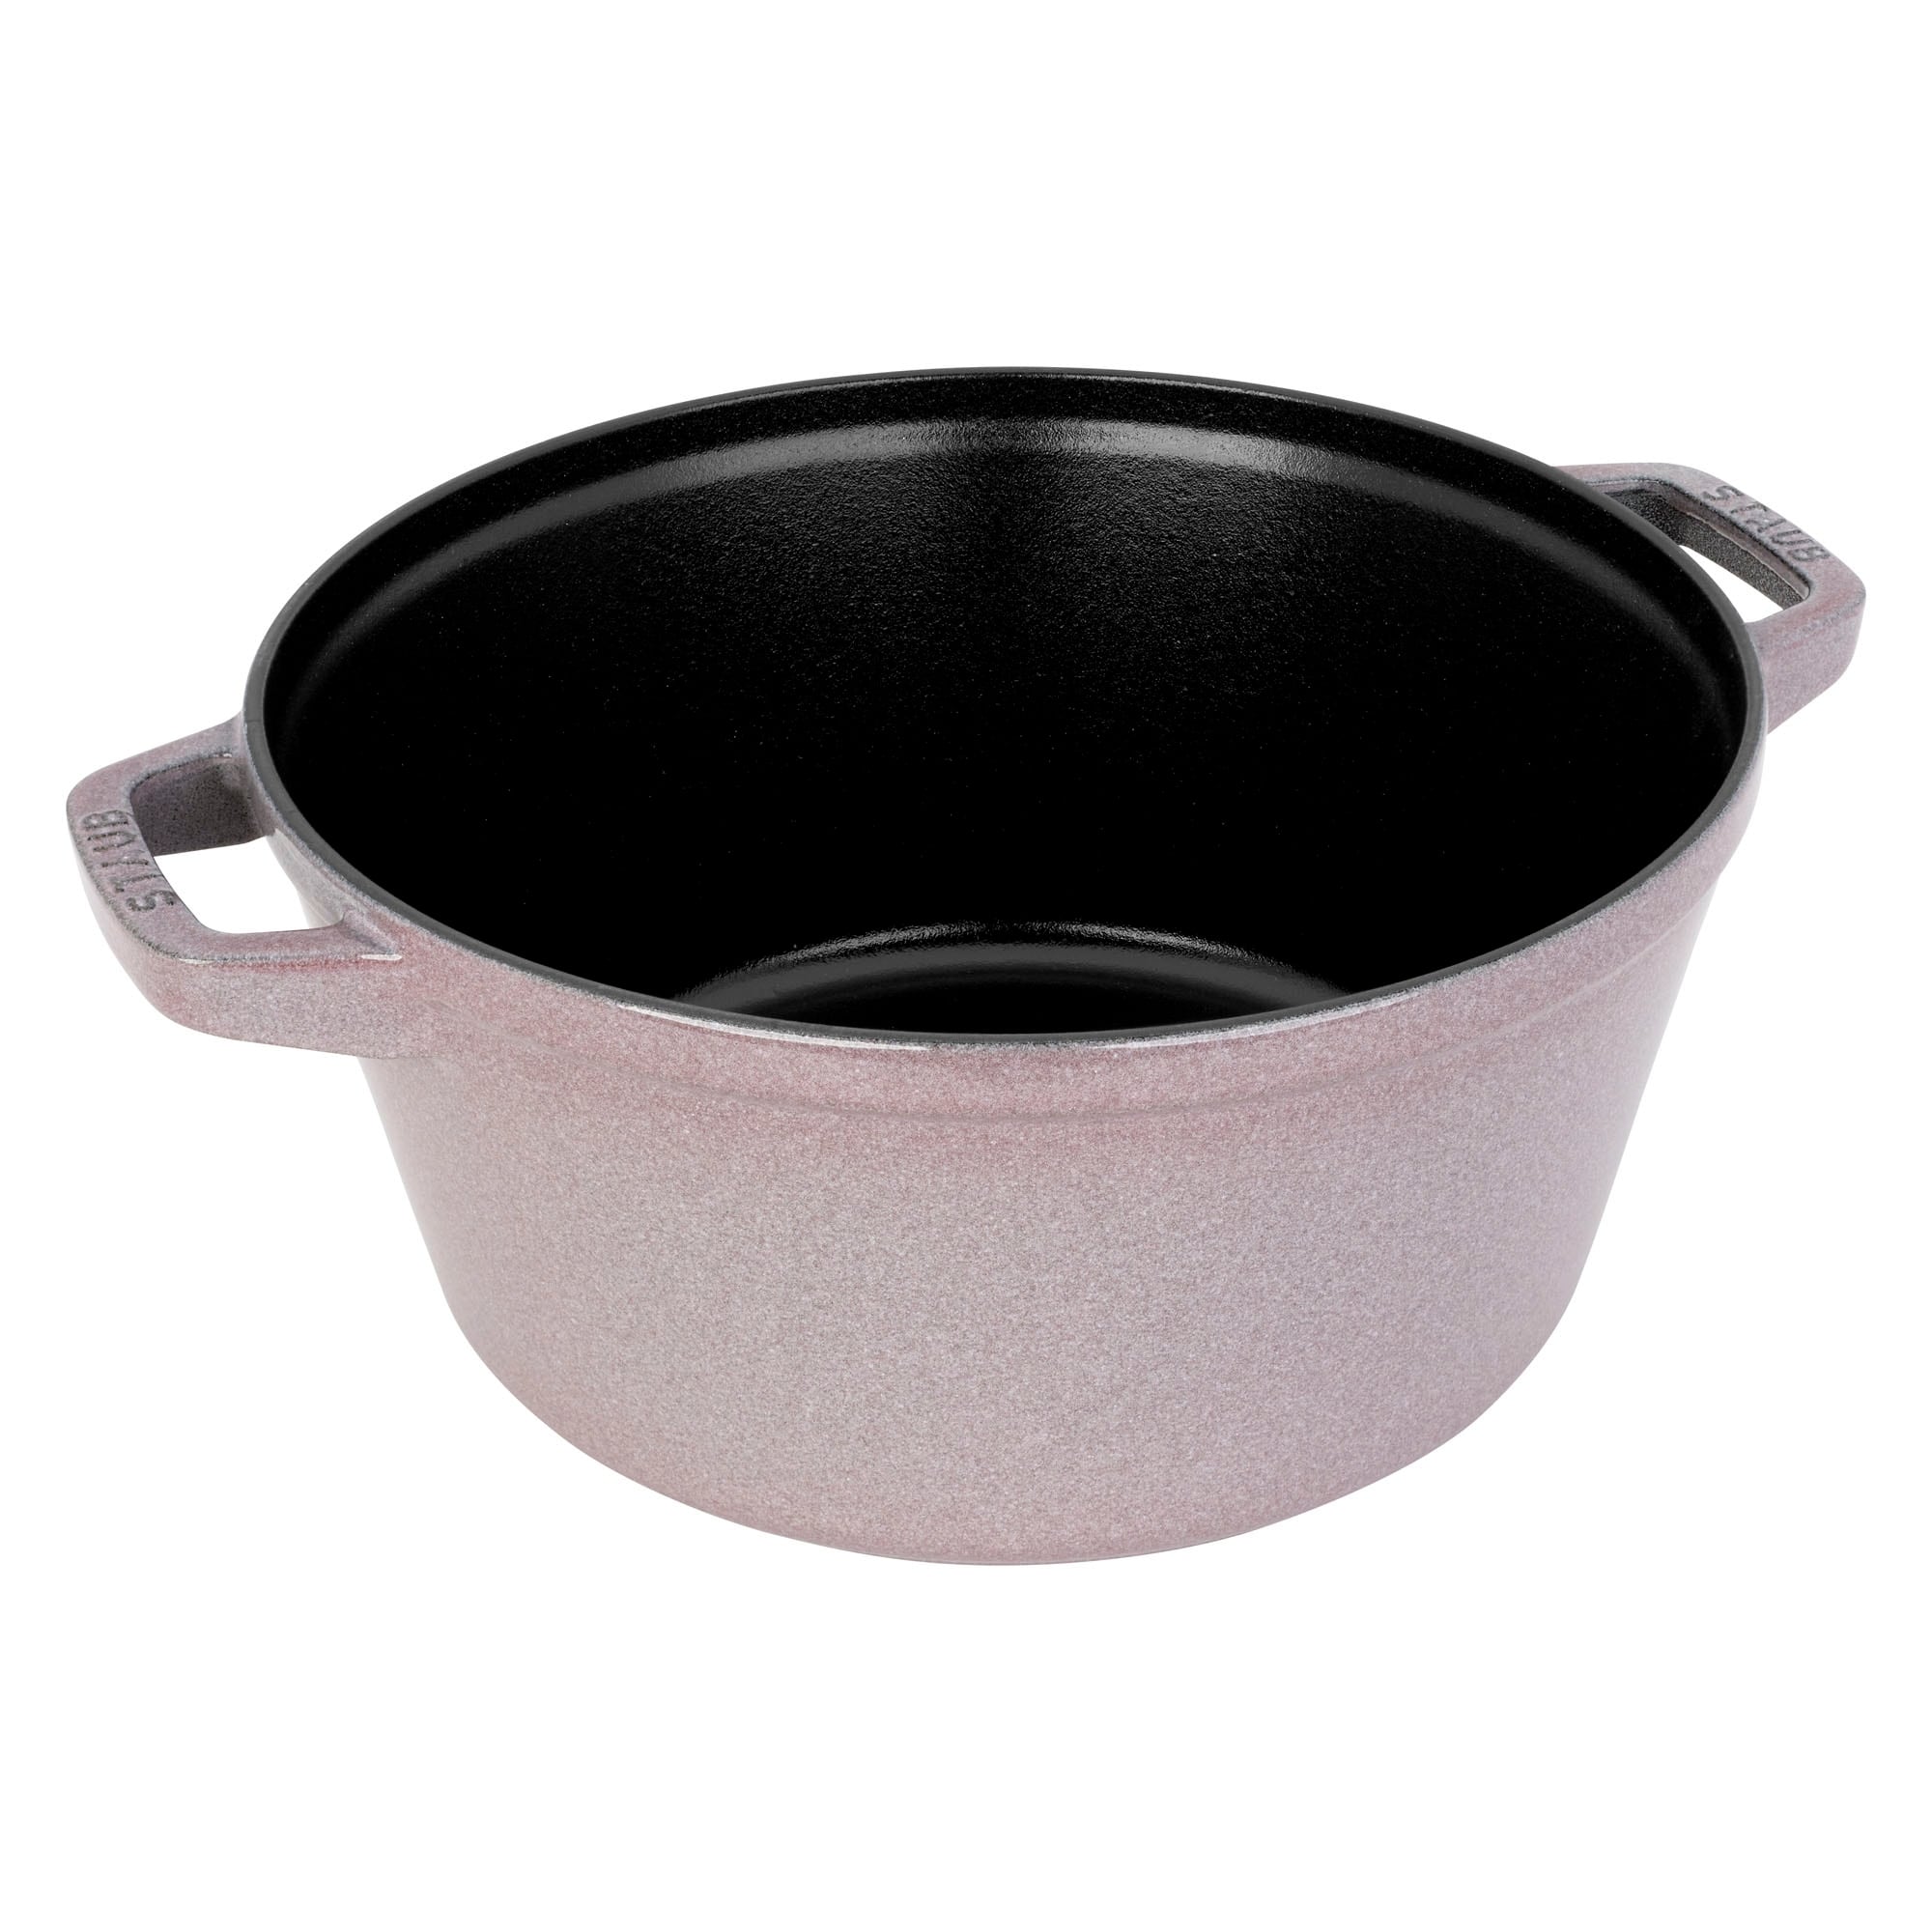 https://ak1.ostkcdn.com/images/products/is/images/direct/cd487e0b2b88be971e83d11294d2db120b235f02/STAUB-Cast-Iron-4-pc-Stackable-Set.jpg